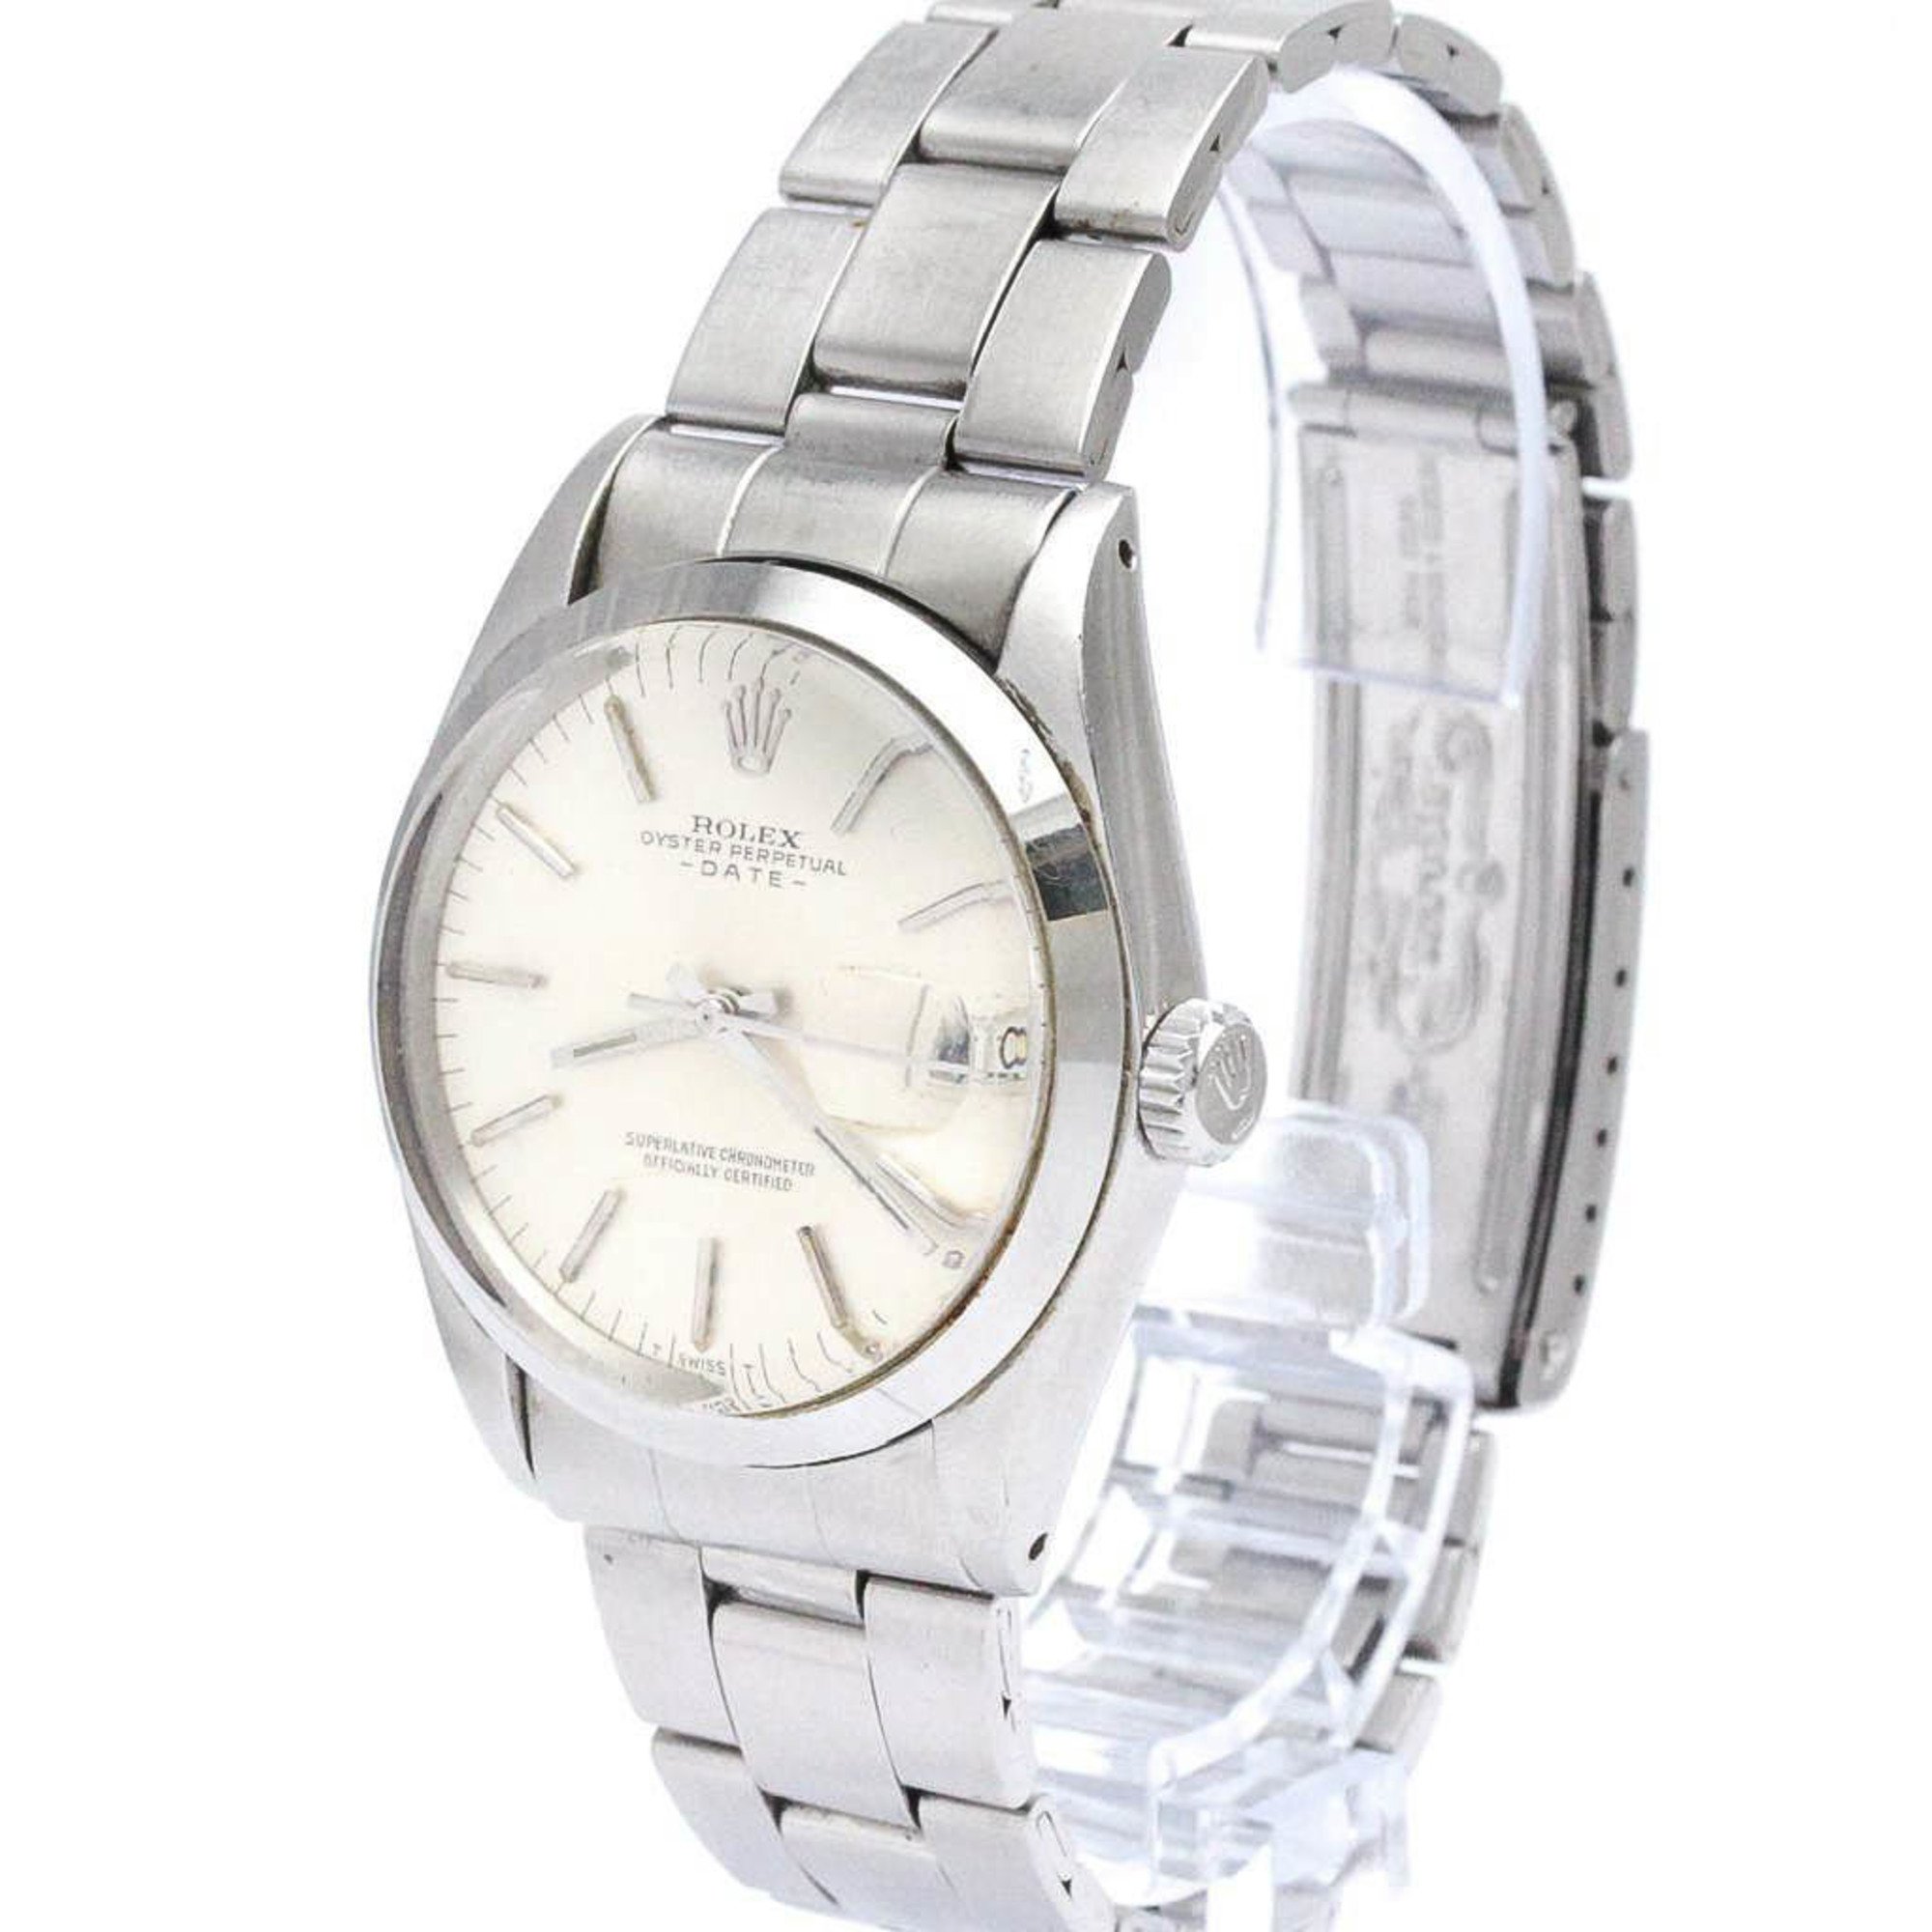 Vintage ROLEX Oyster Perpetual Date 1500 Steel Automatic Mens Watch BF565466